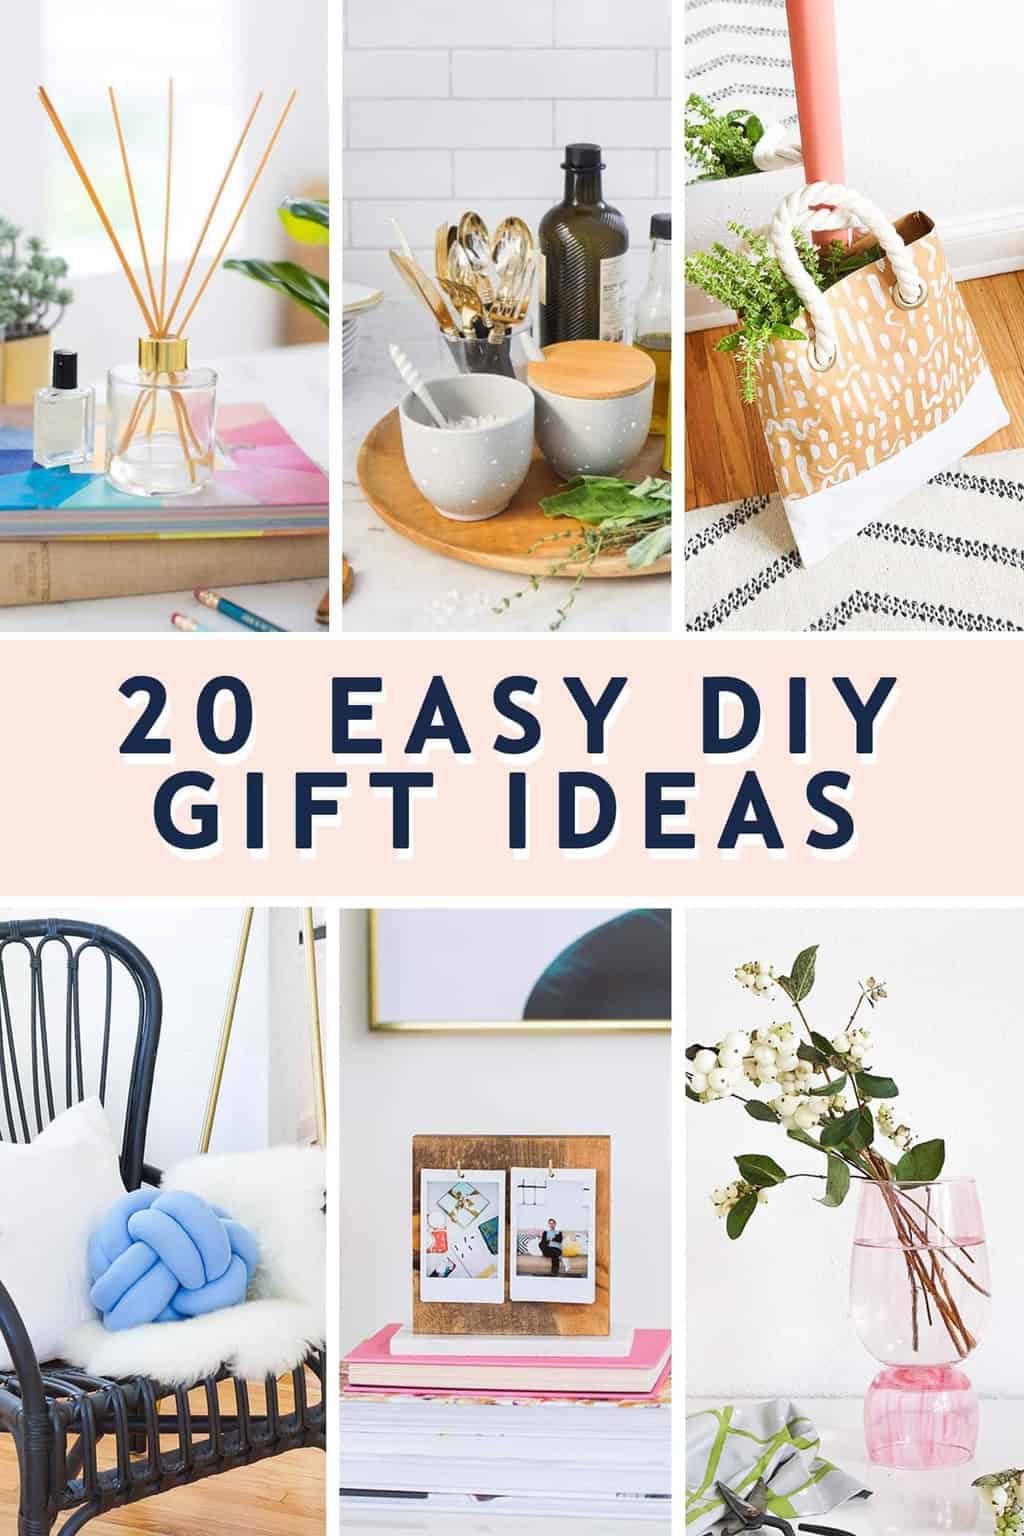 Handmade Gifts Ideas   Easy DIY Gifts For Friends And Family